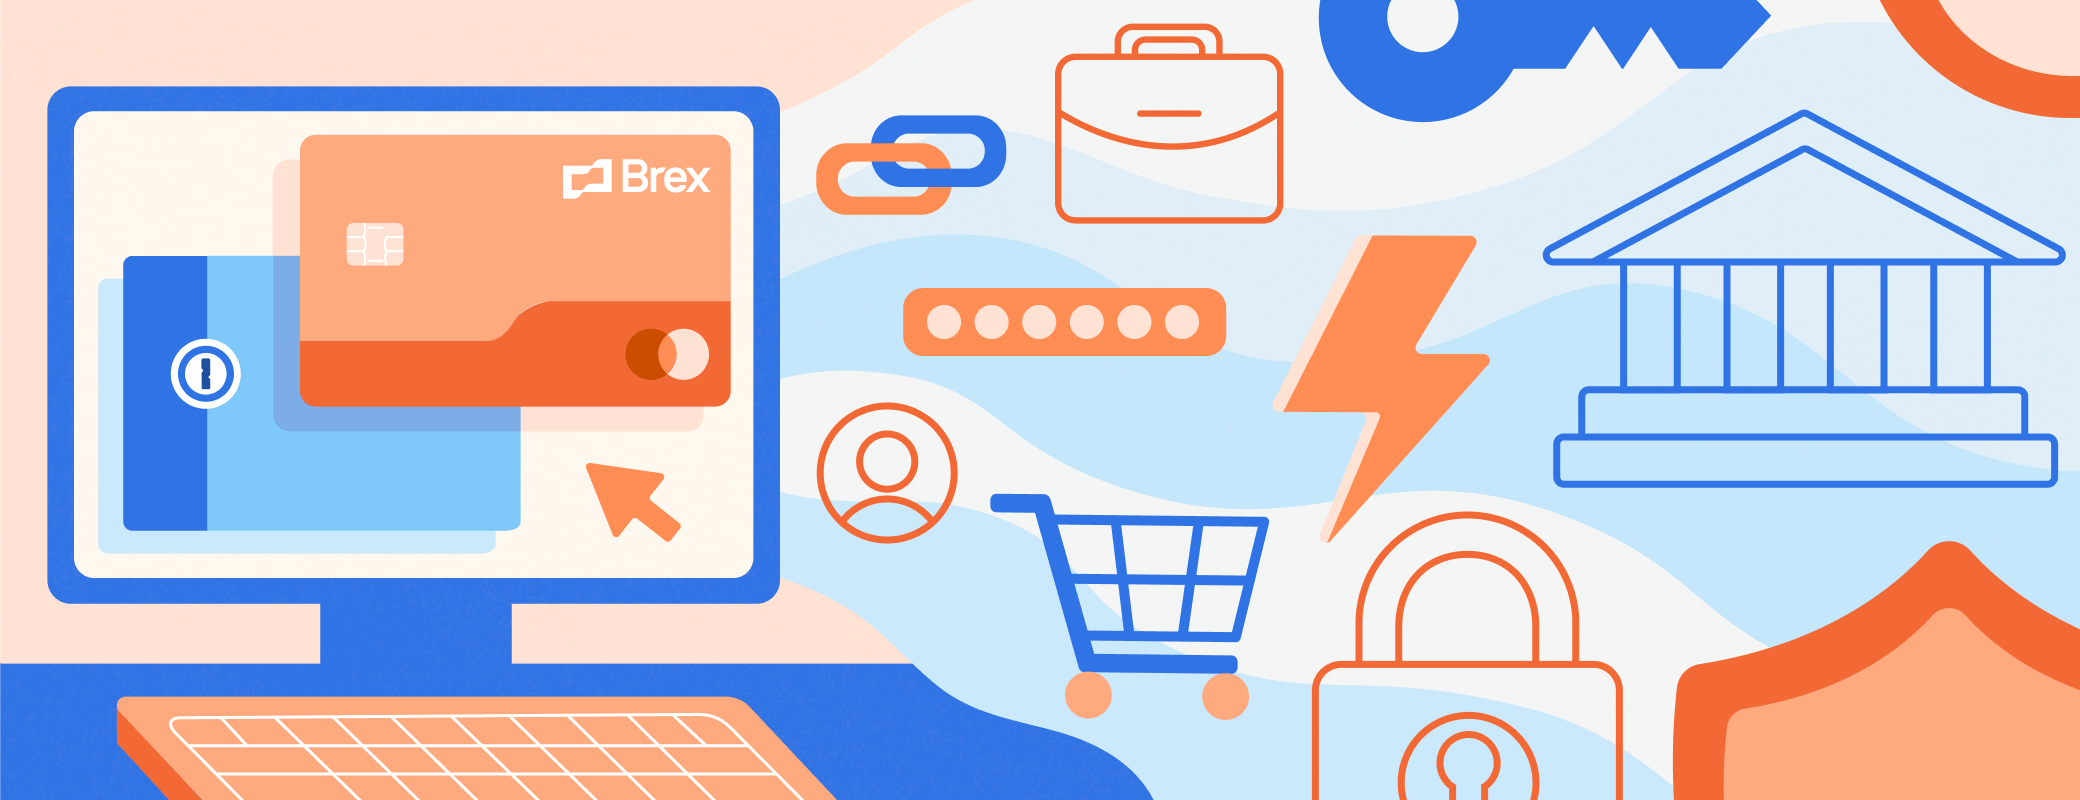 Secure online payments and grow your business with Brex and 1Password